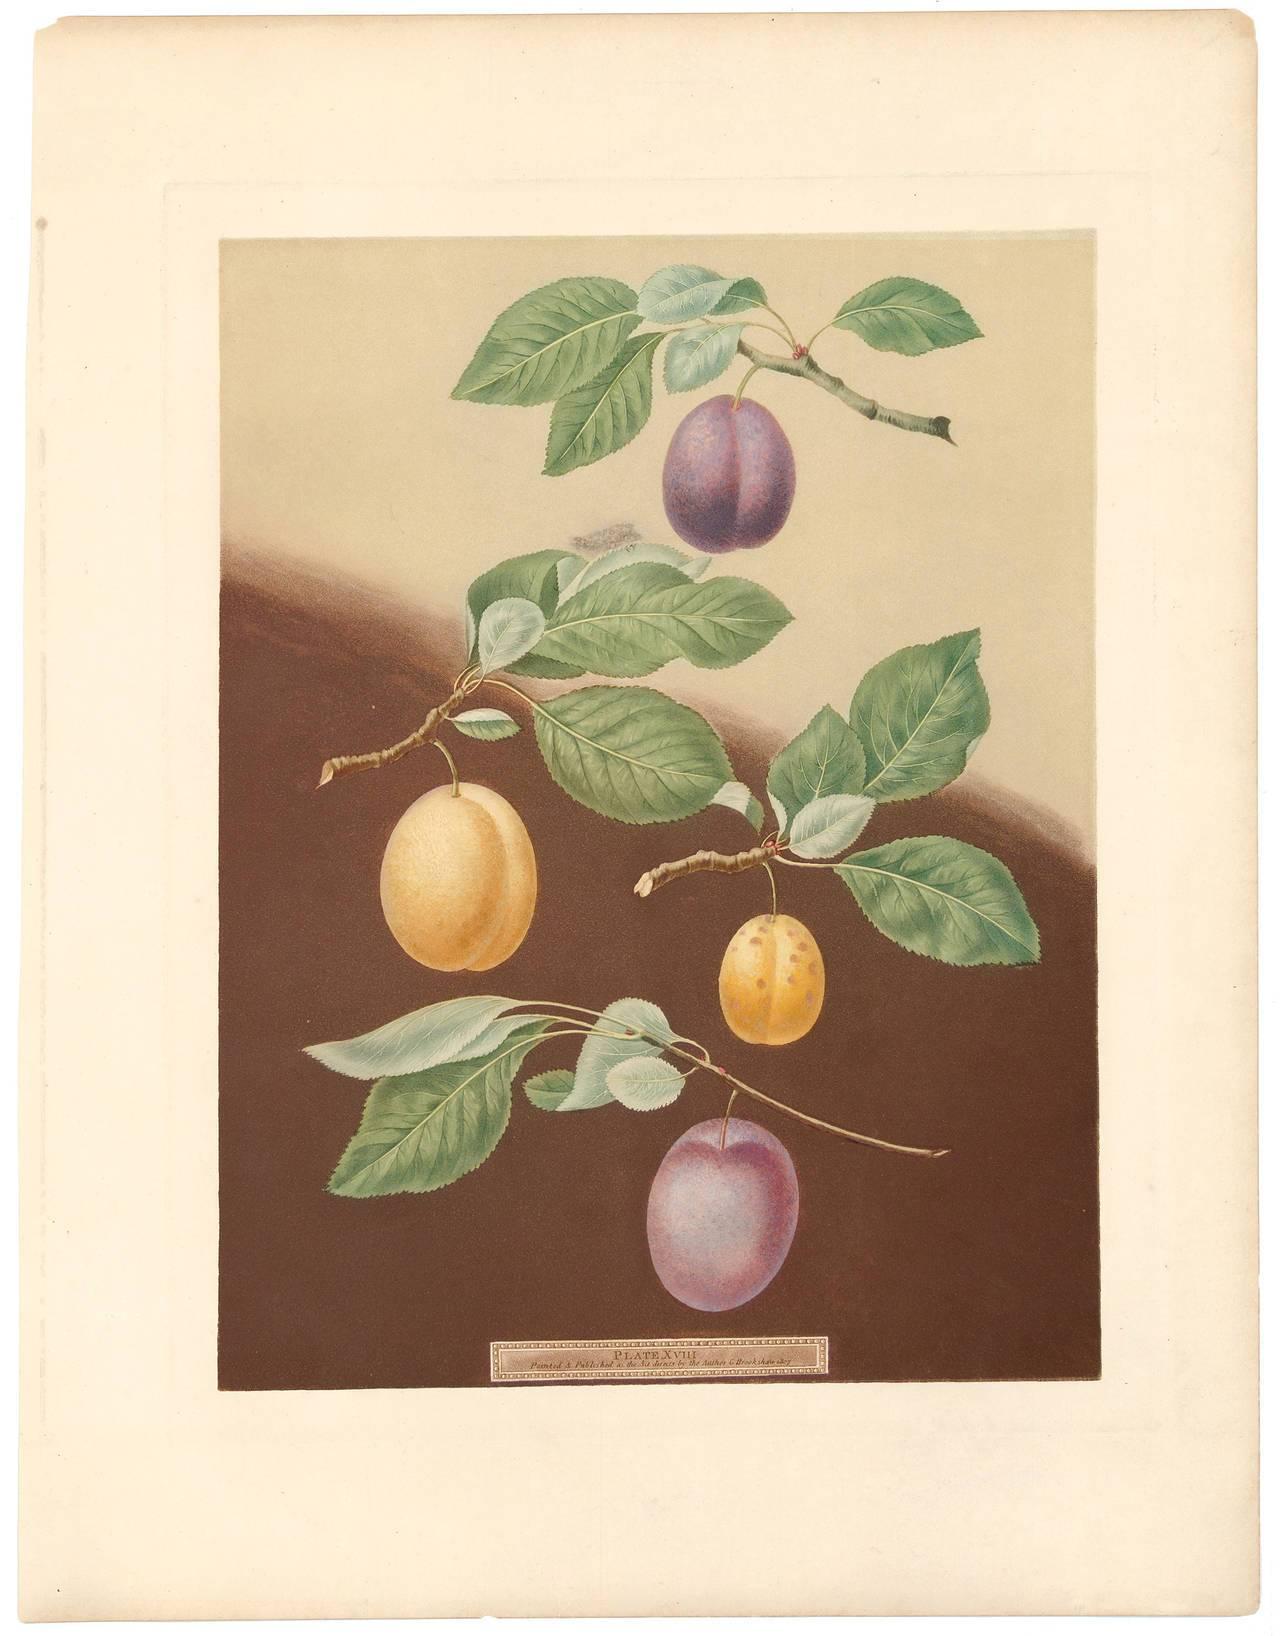 Plate XVIII Plums from 